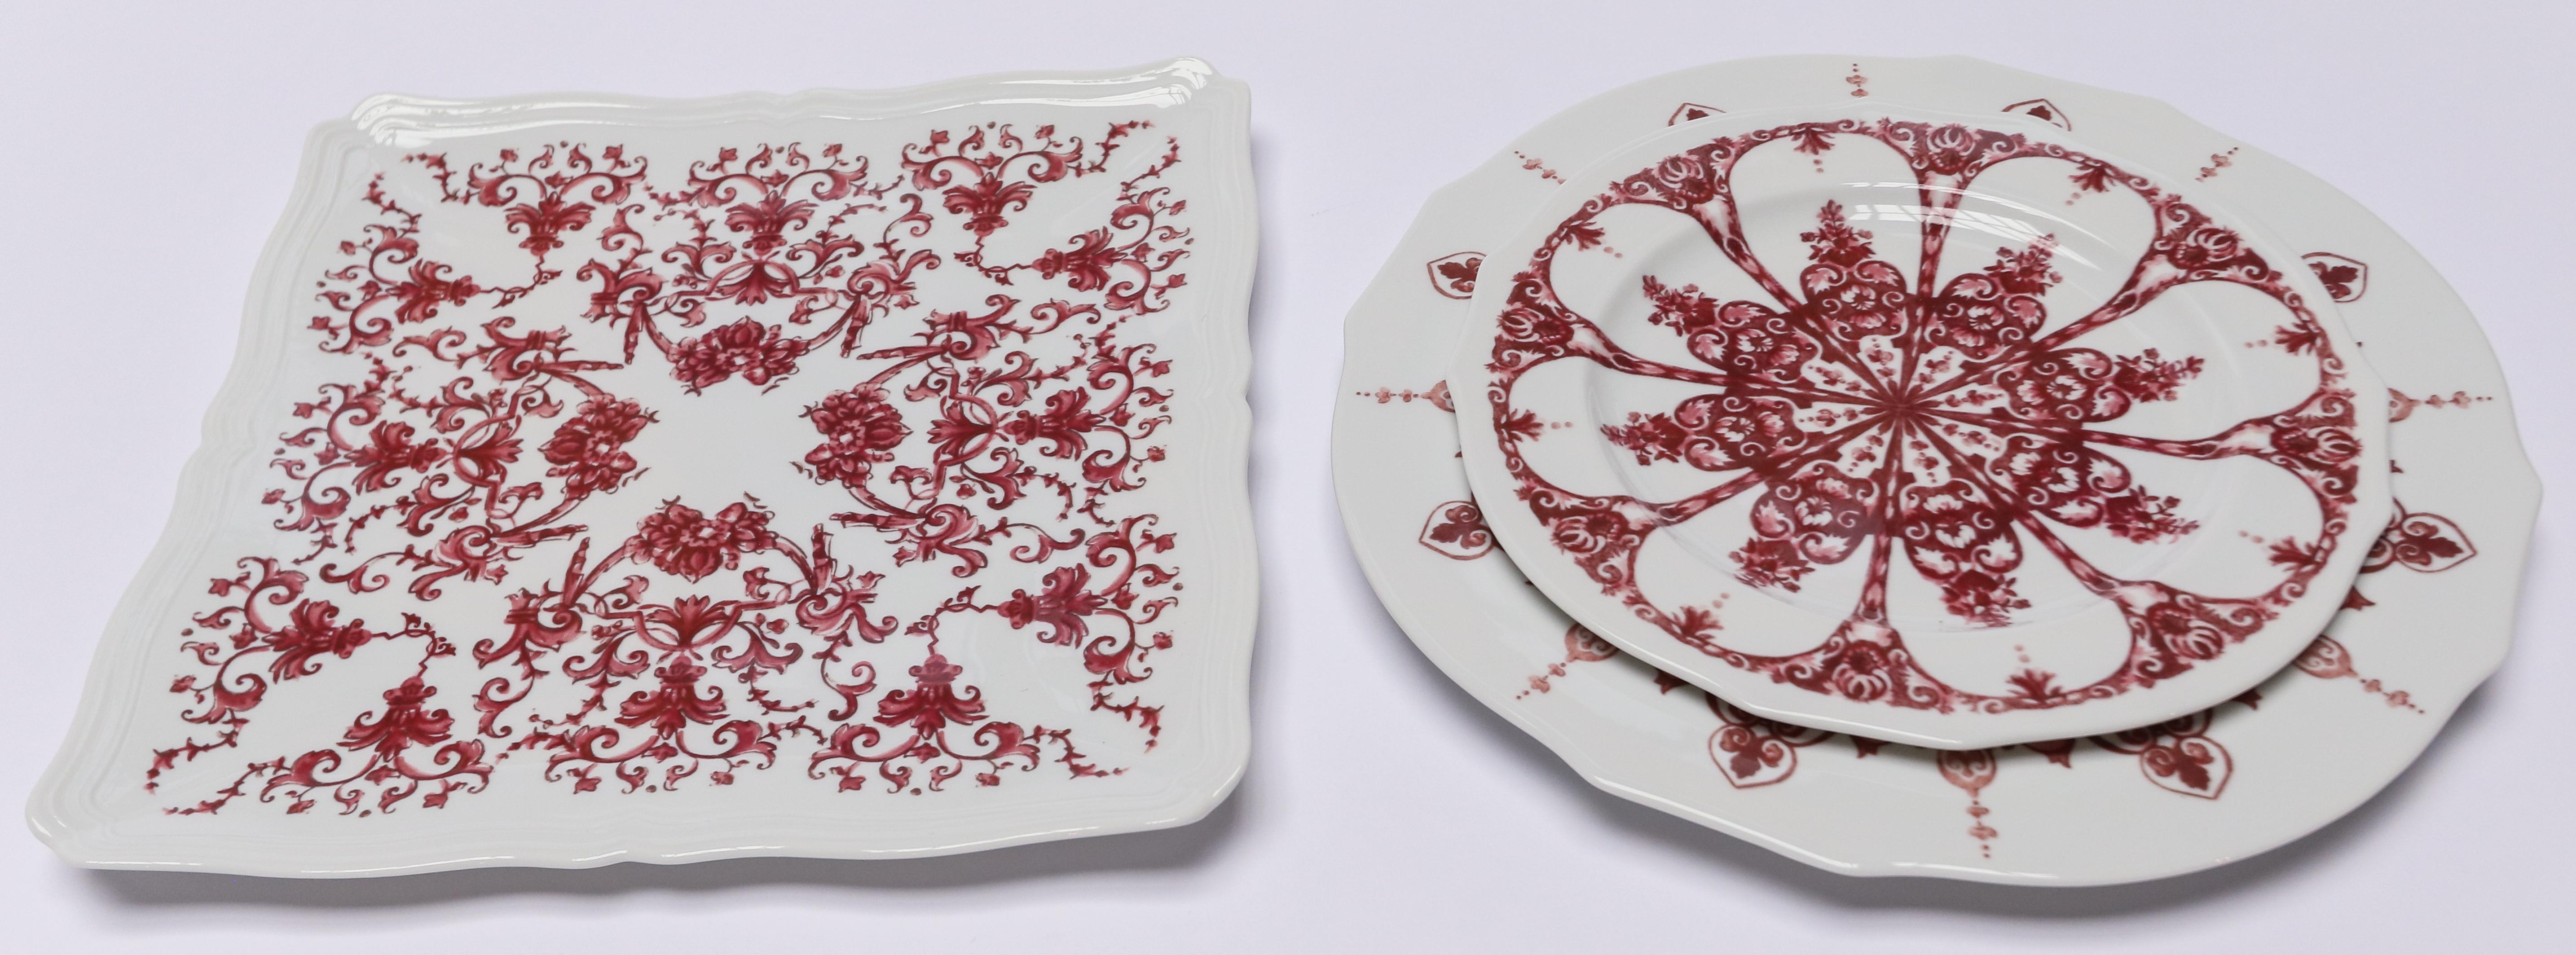 Contemporary Richard Ginori Babele Rosso Red Dinner Plate